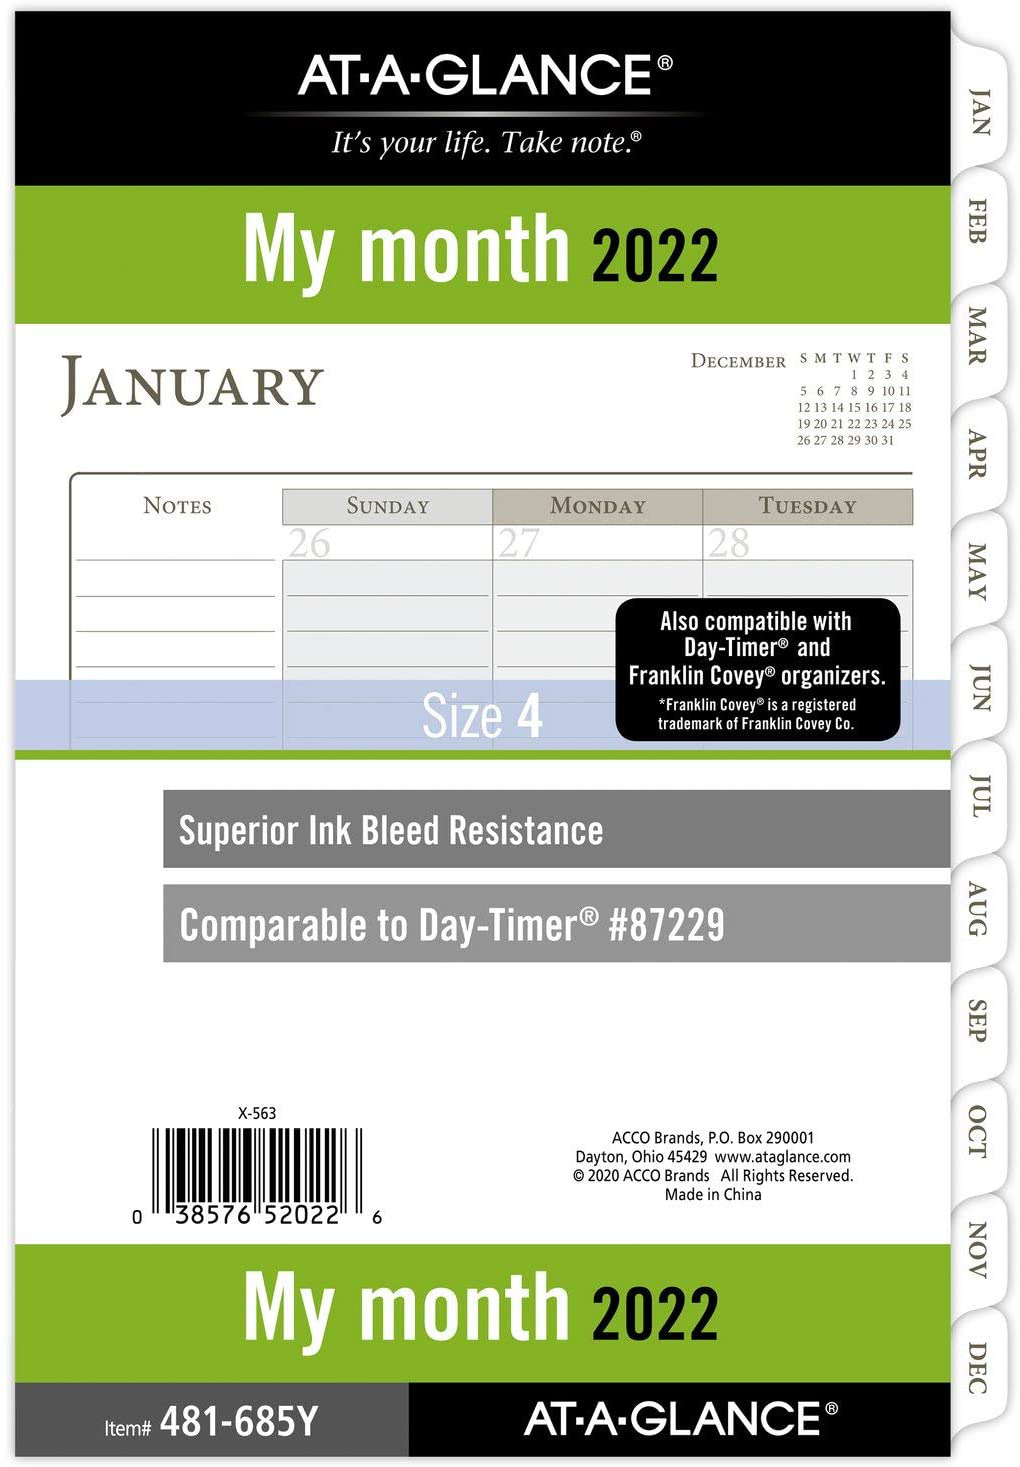 2022 Monthly Planner Refill By At-a-glance, 87229 Day-timer, 5-1/2" X 8-1/2"